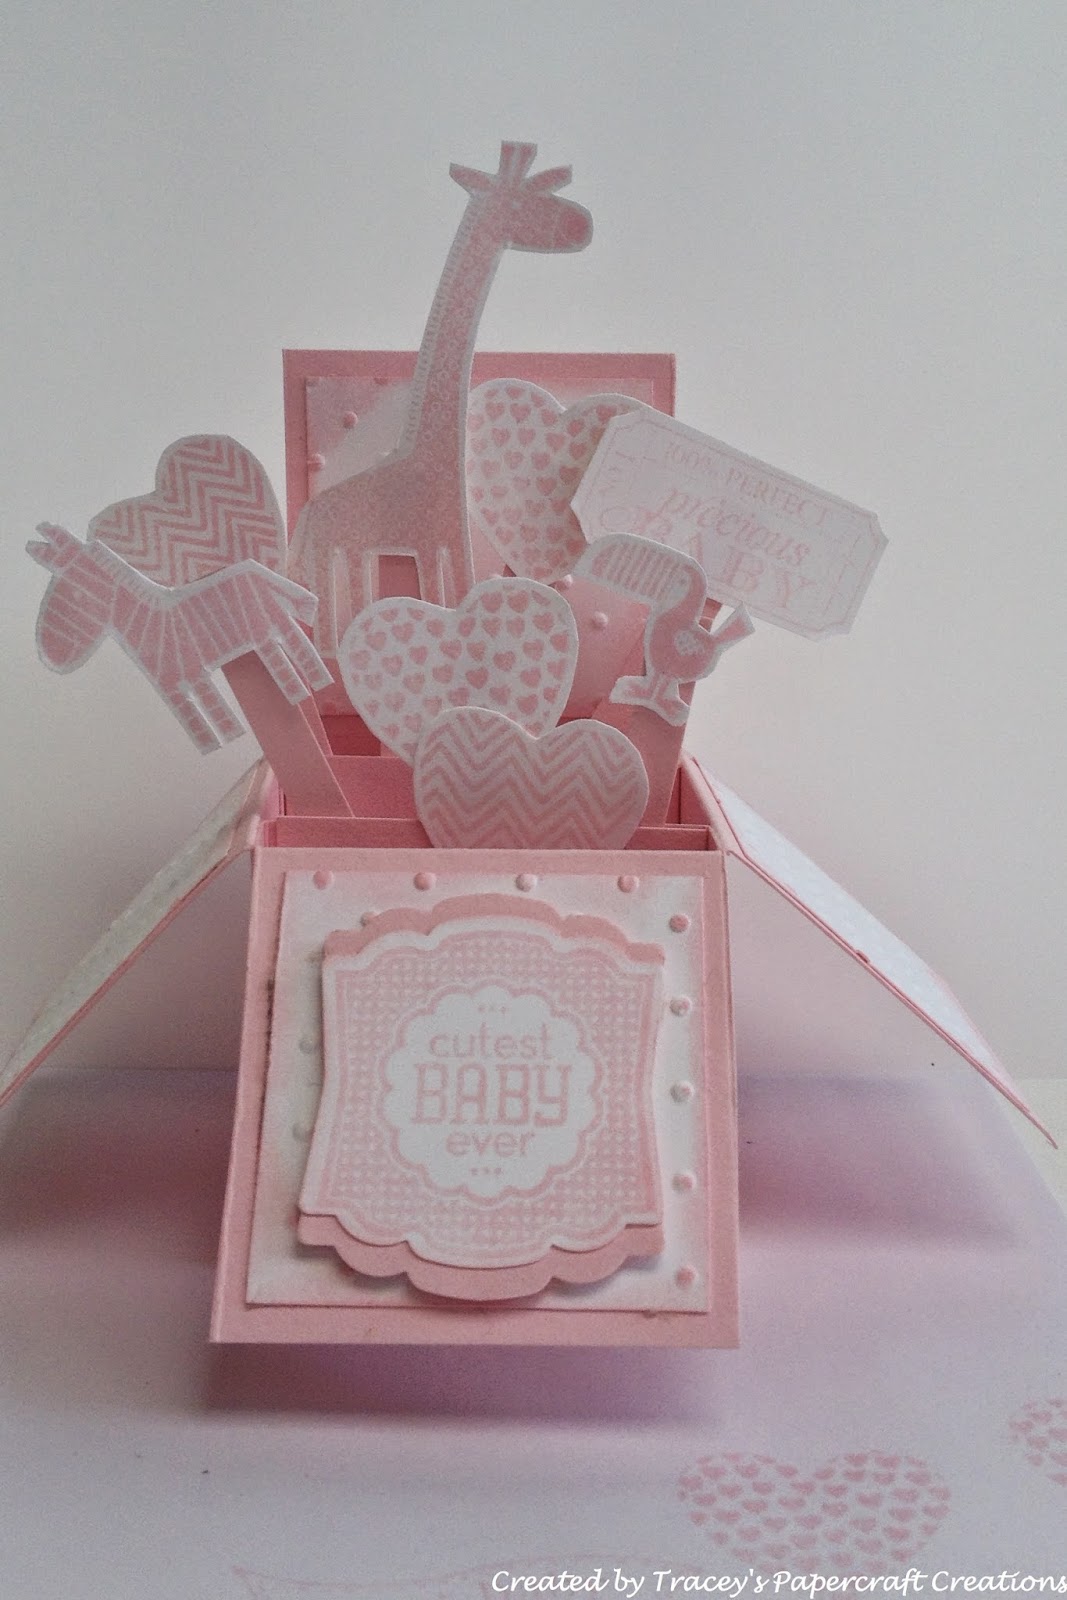 tracey-s-papercraft-creations-baby-cards-cards-in-a-box